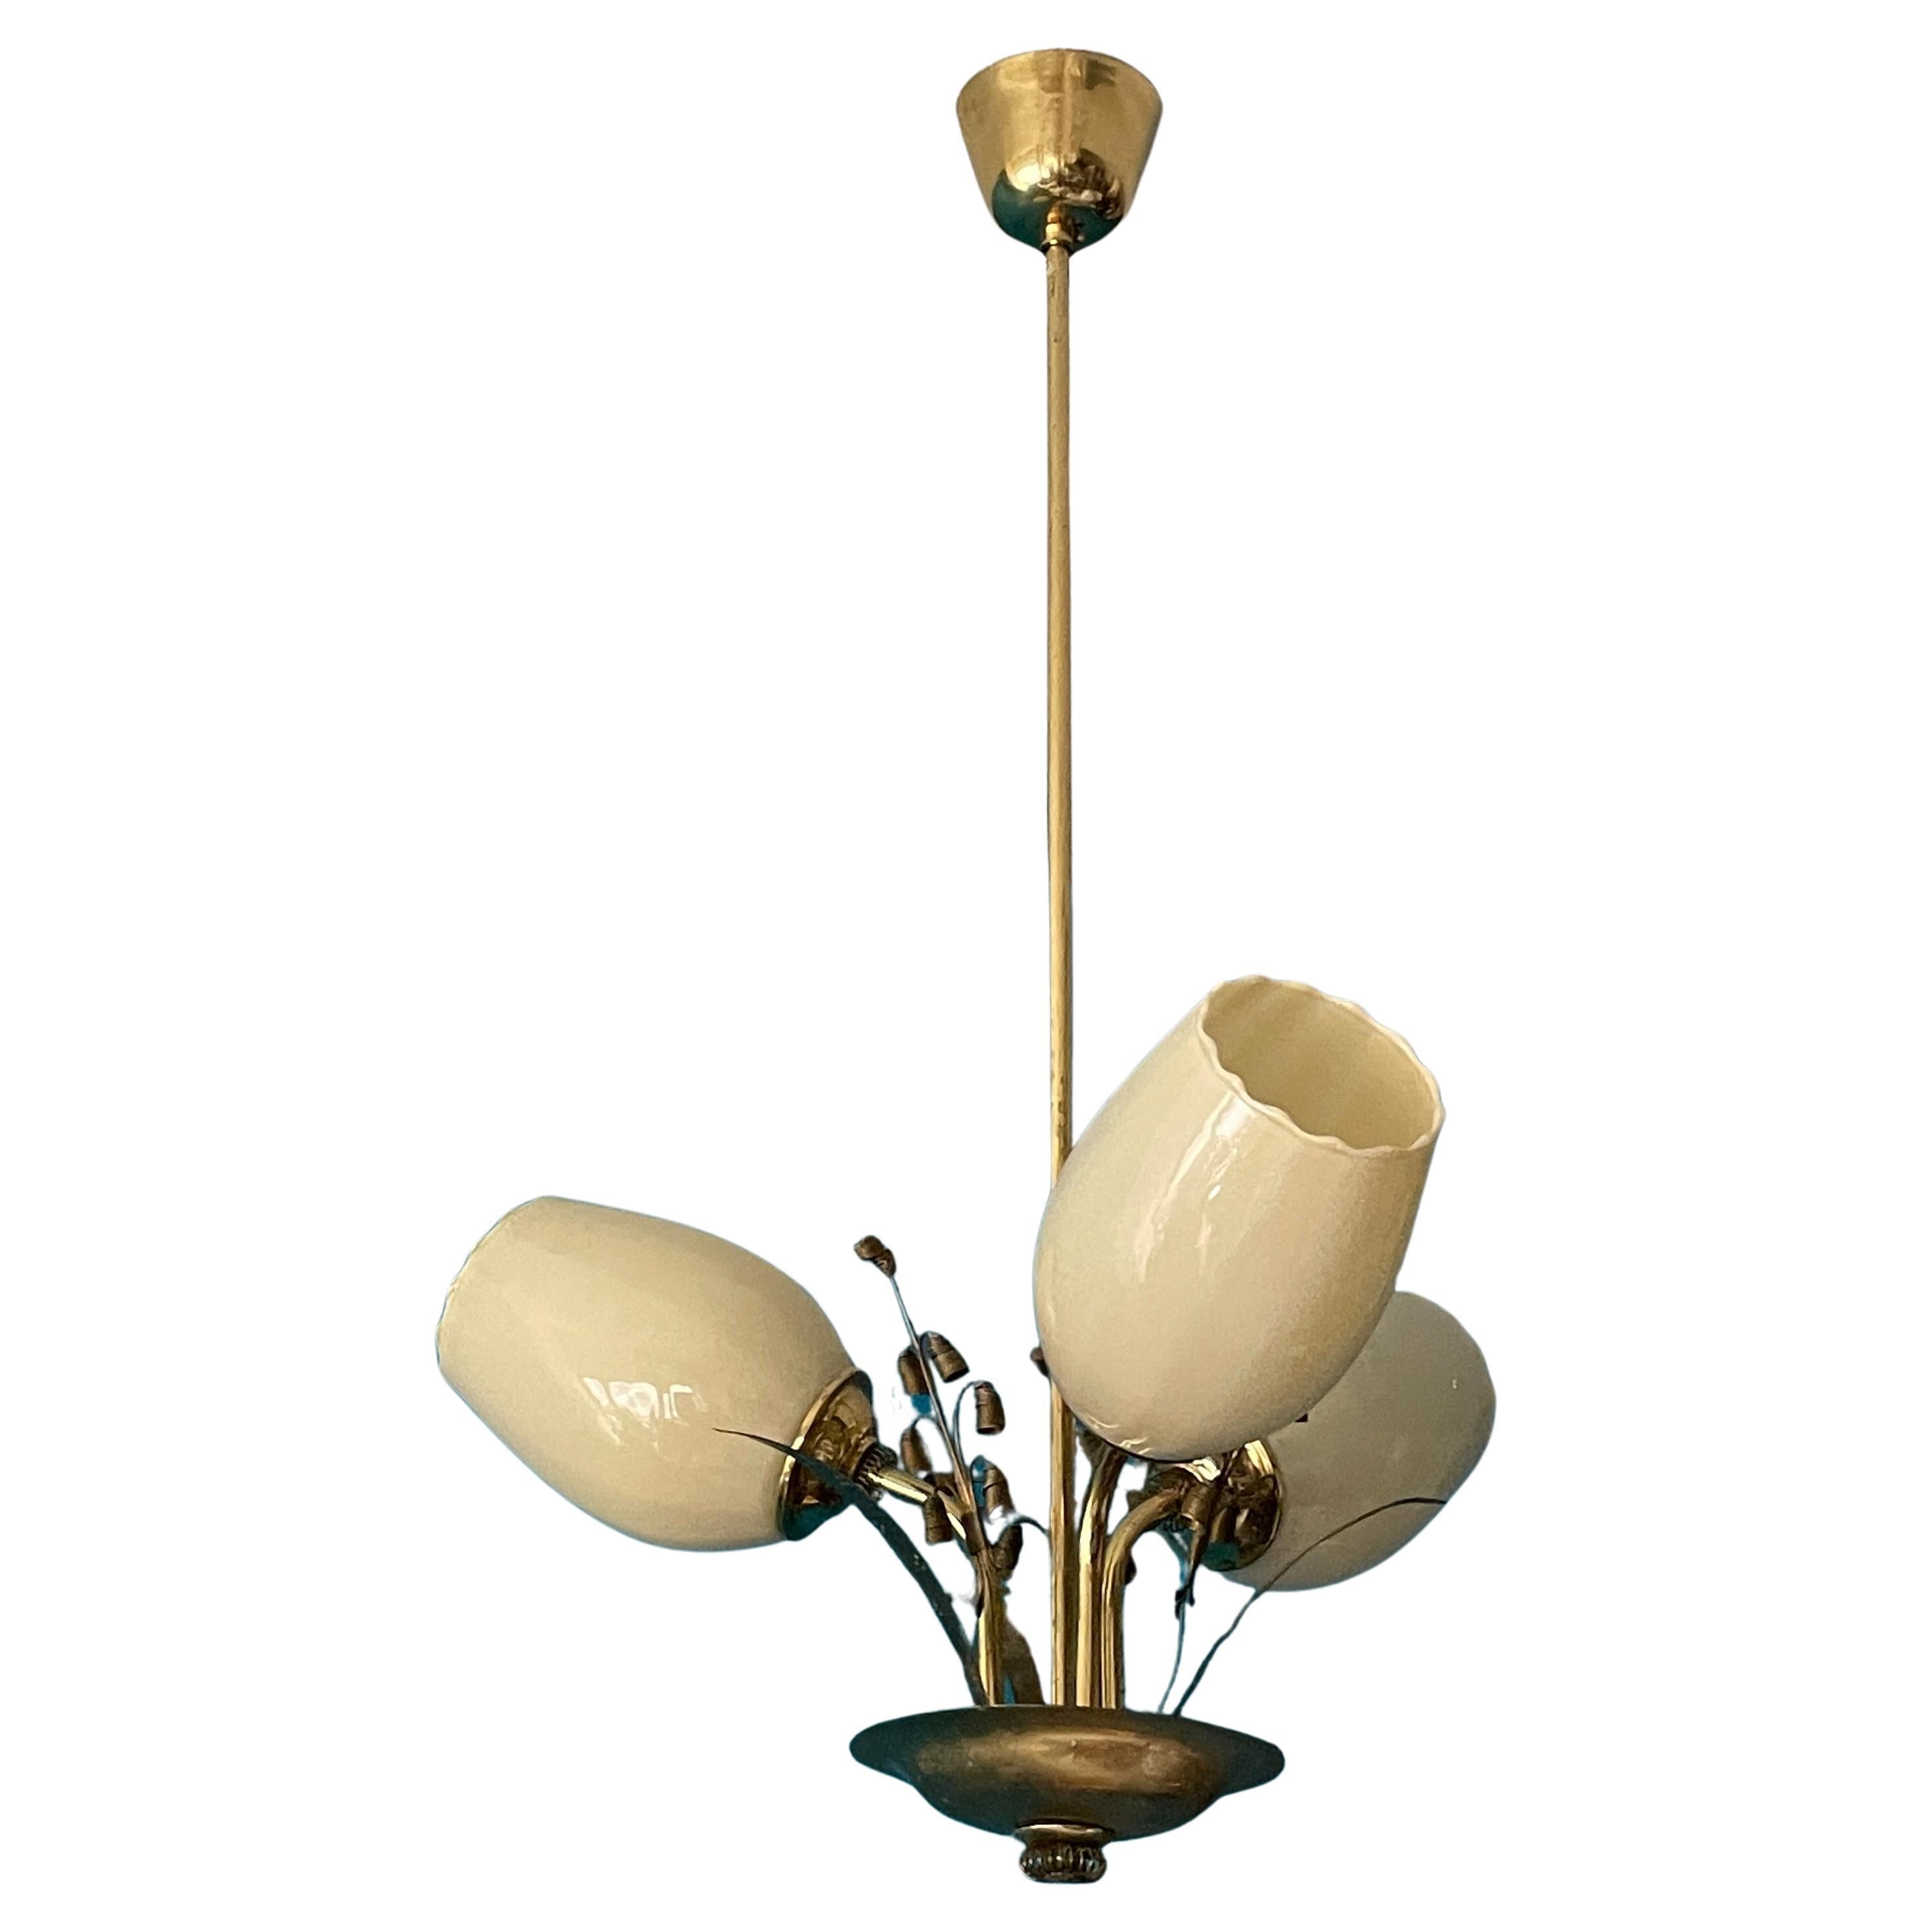 Mid-20th Century Brass Chandelier, Paavo Tynell Style, Made in Finland For Sale